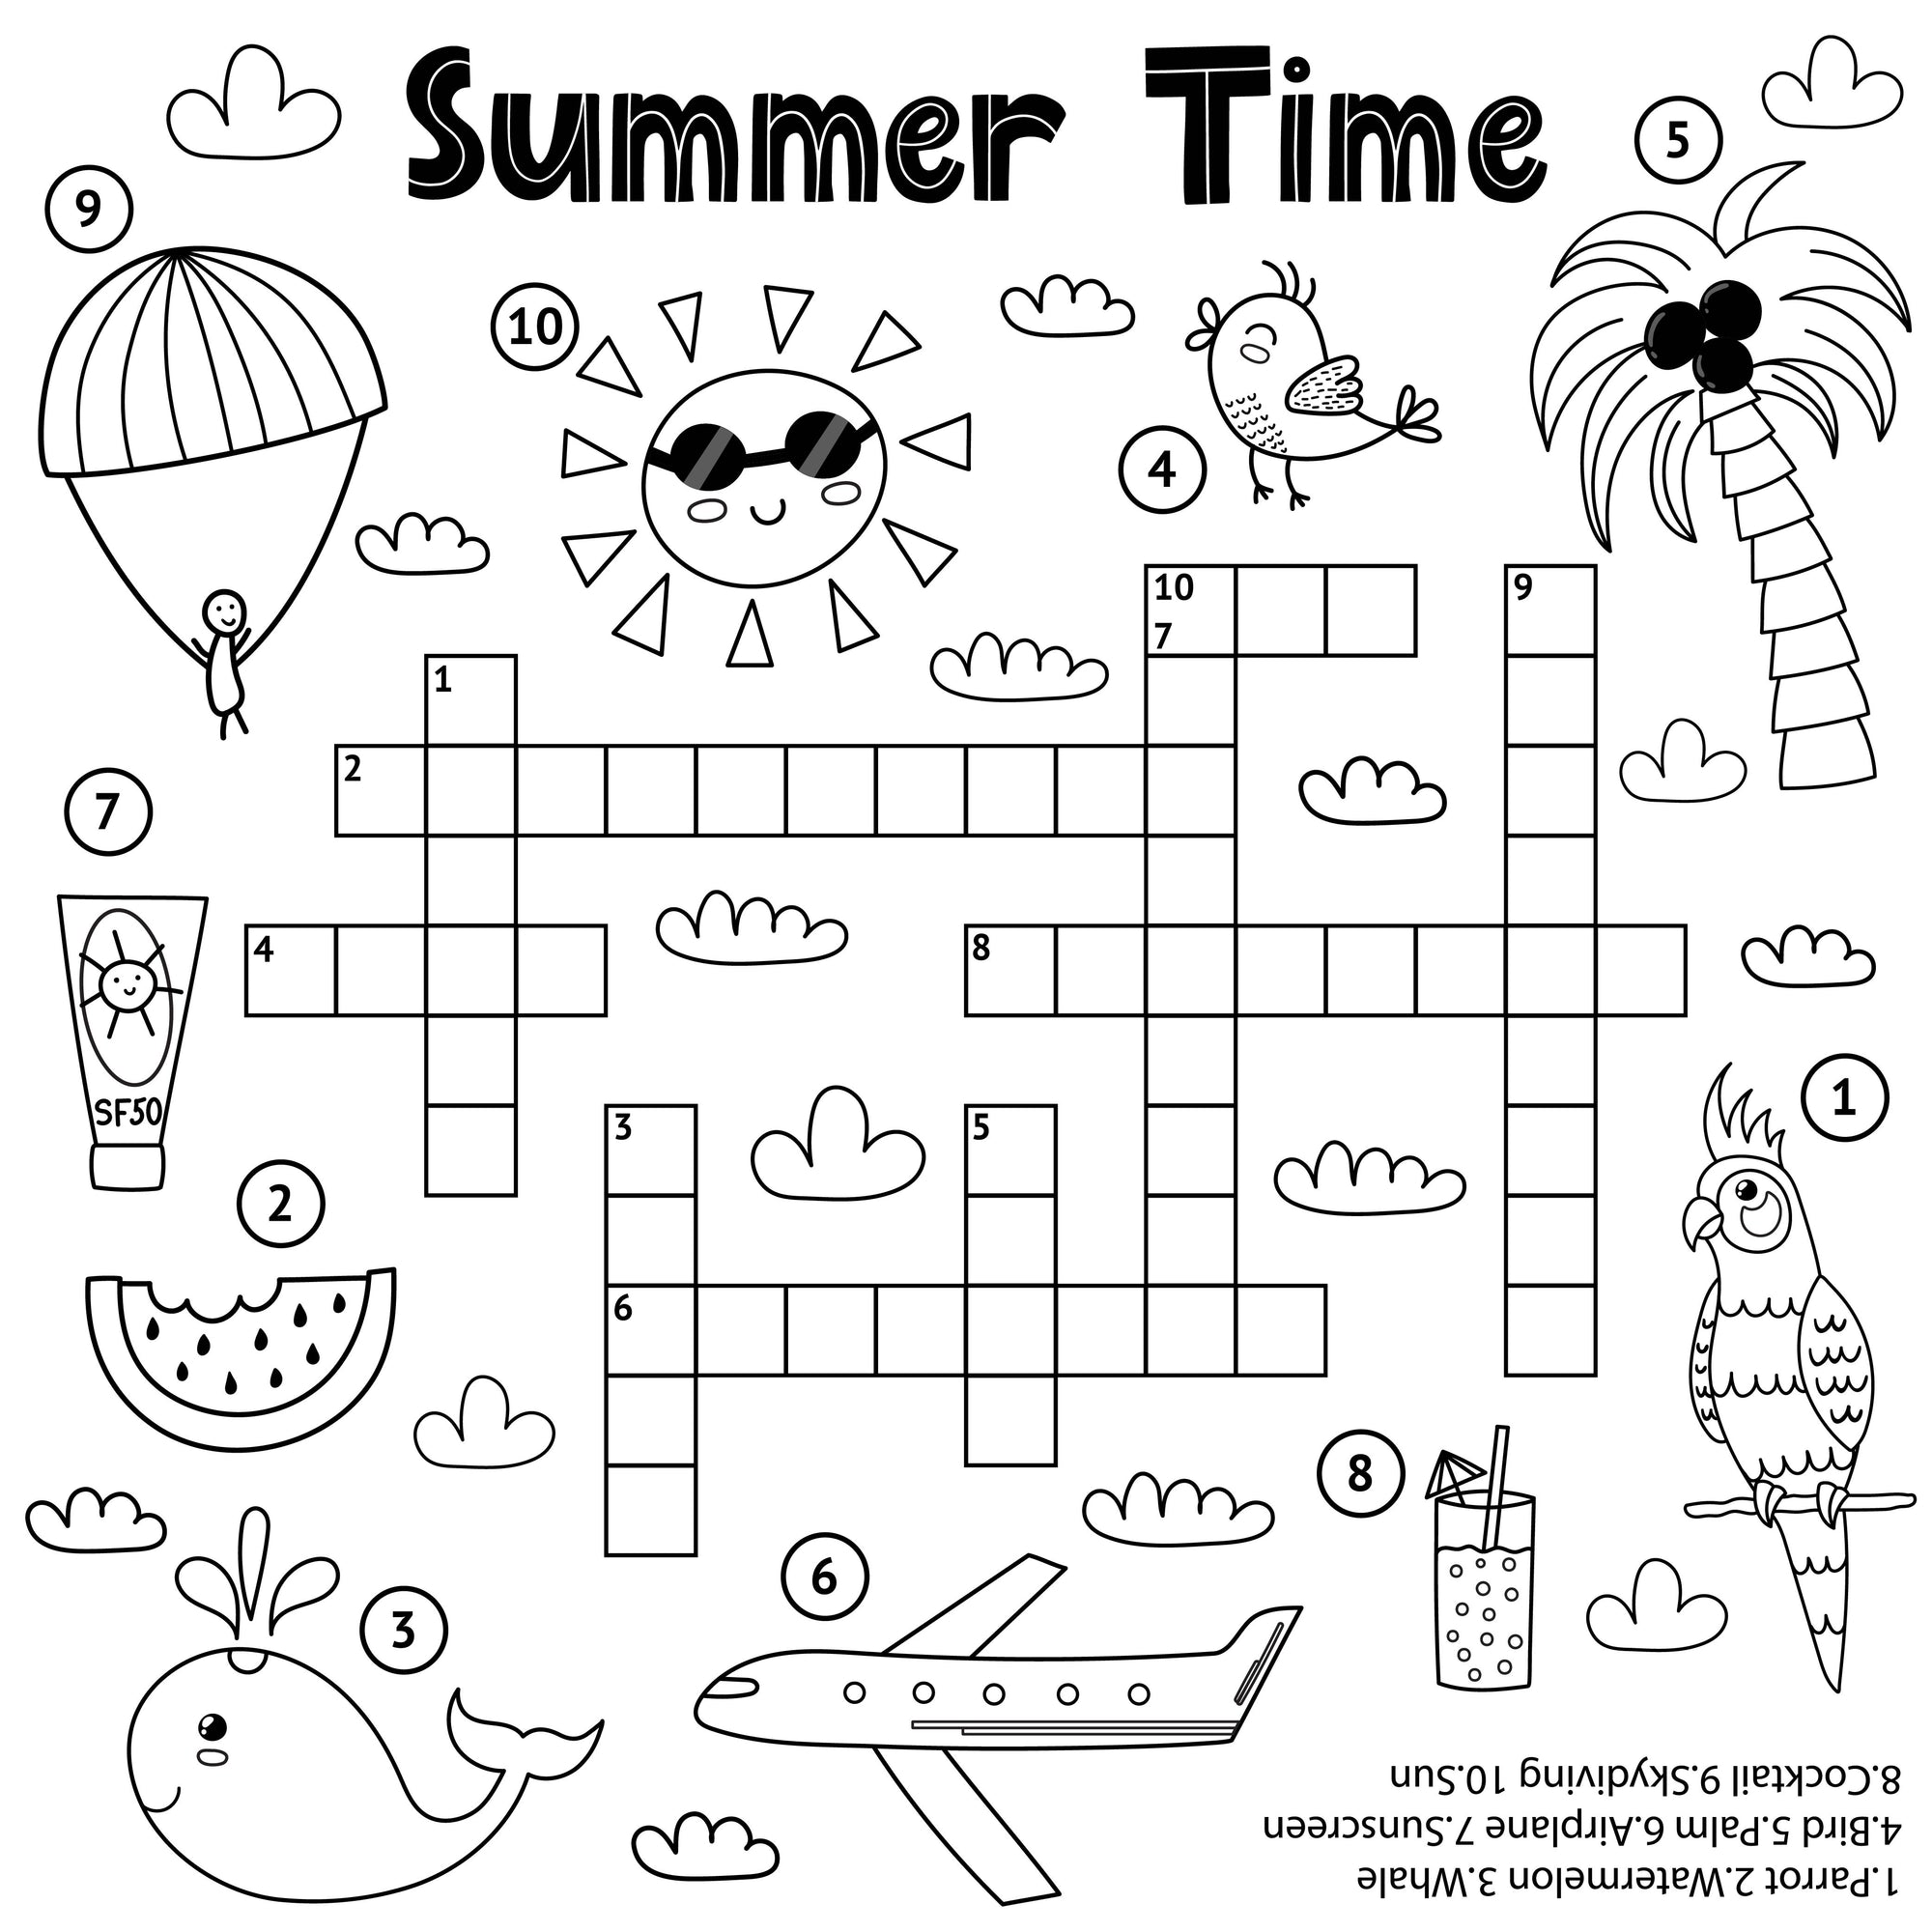 Summertime Colouring-in Crossword PDF Download